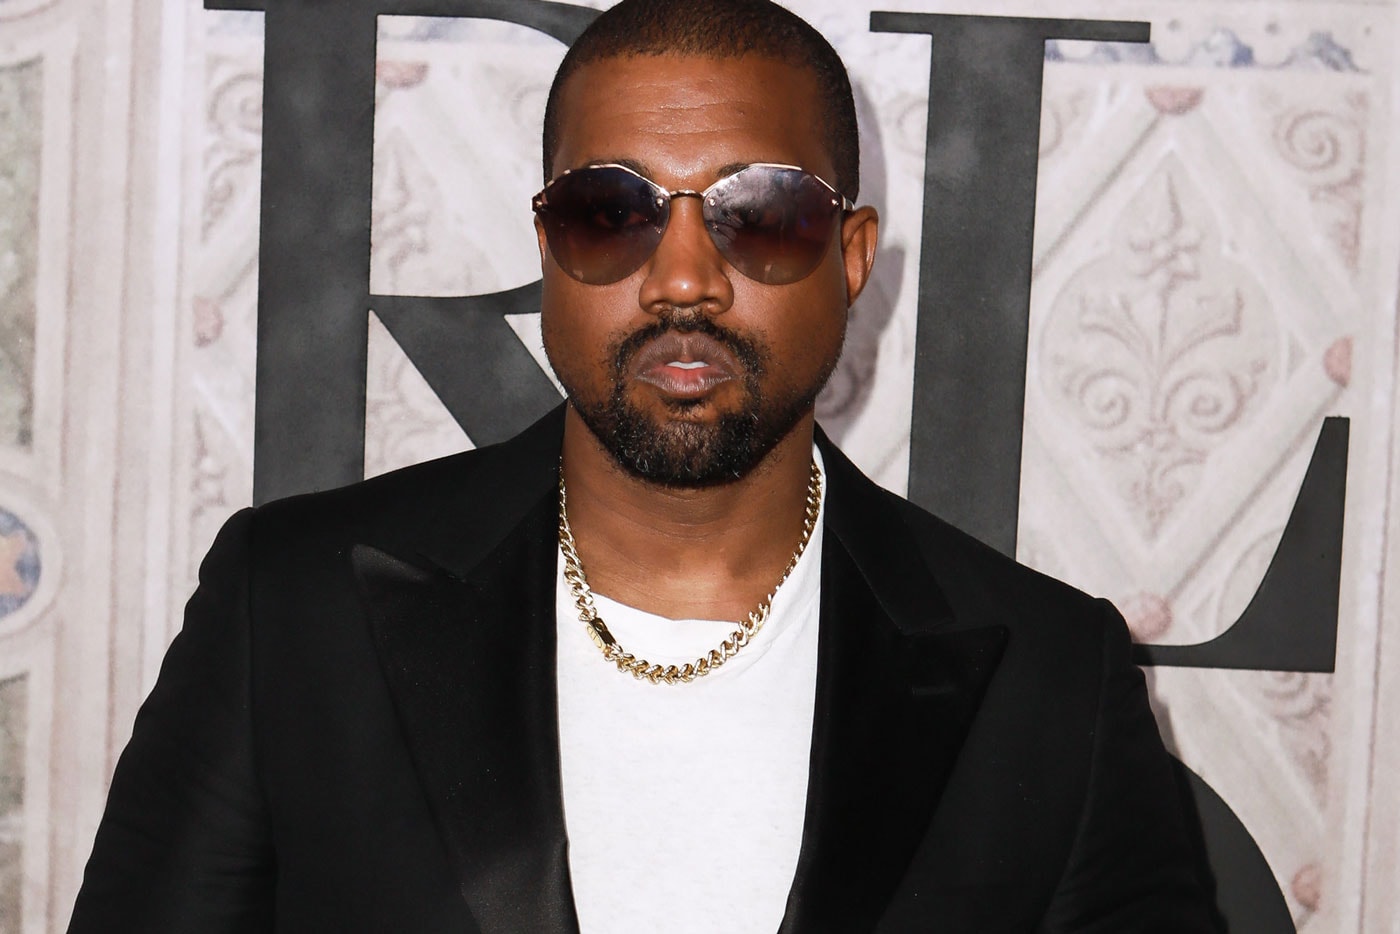 Kanye West's New Album is "Coming Very Soon"